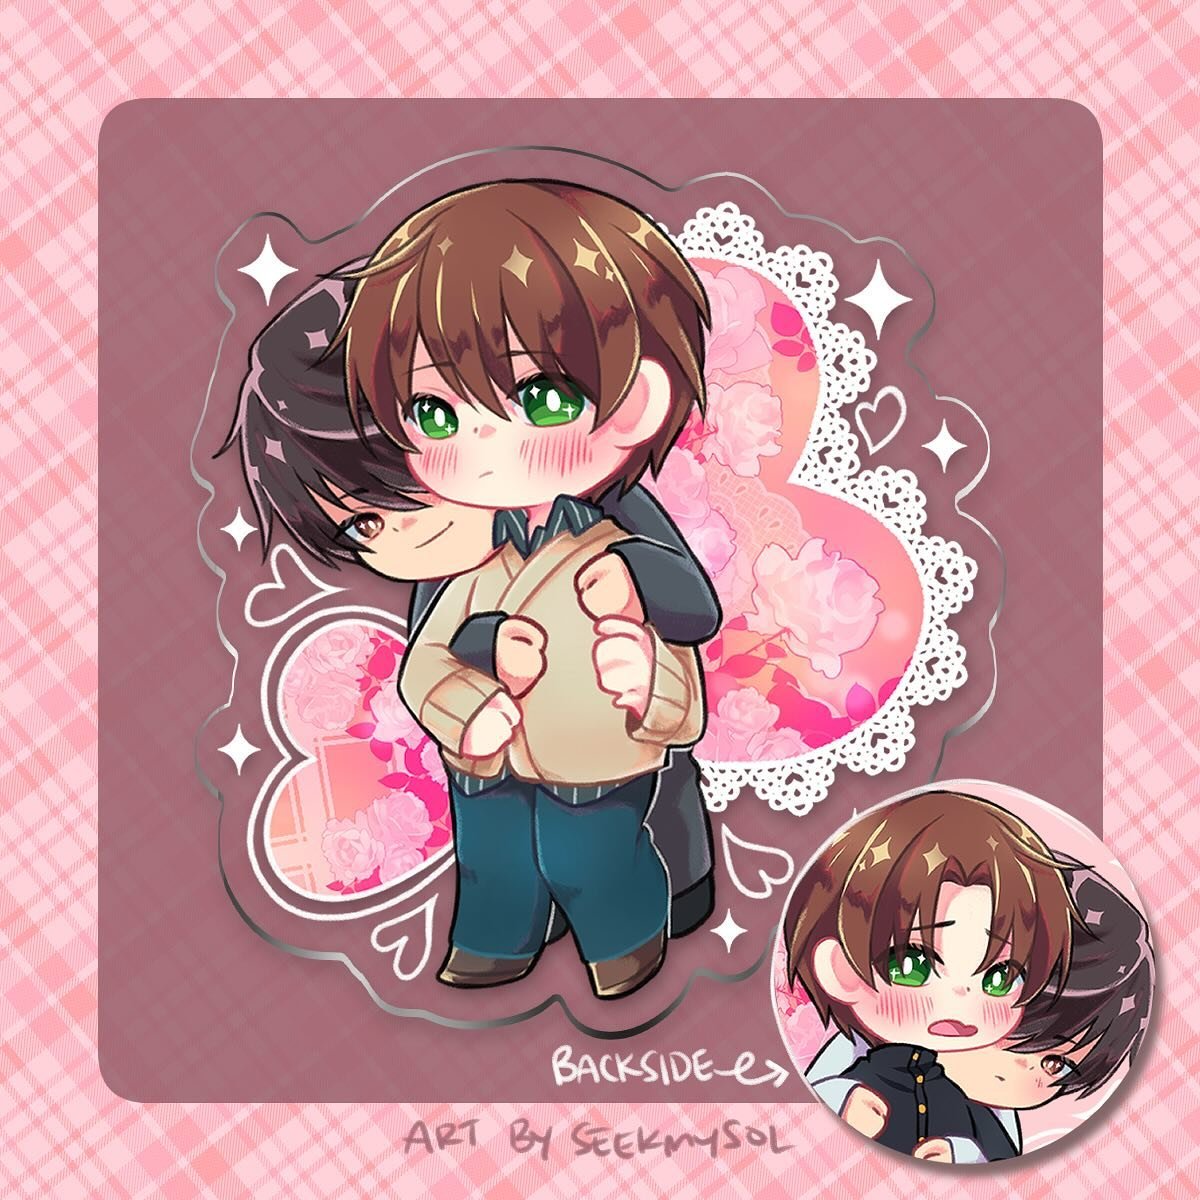 World&rsquo;s Greatest First Love! Congrats to Onodera for finally confessing his love!!!! I&rsquo;m so happy for them!! I&rsquo;m hoping to make this into a keychain heheh. Maybe I&rsquo;ll throw preorders up in my shop but idk yet!
.
.
#sekaiichiha